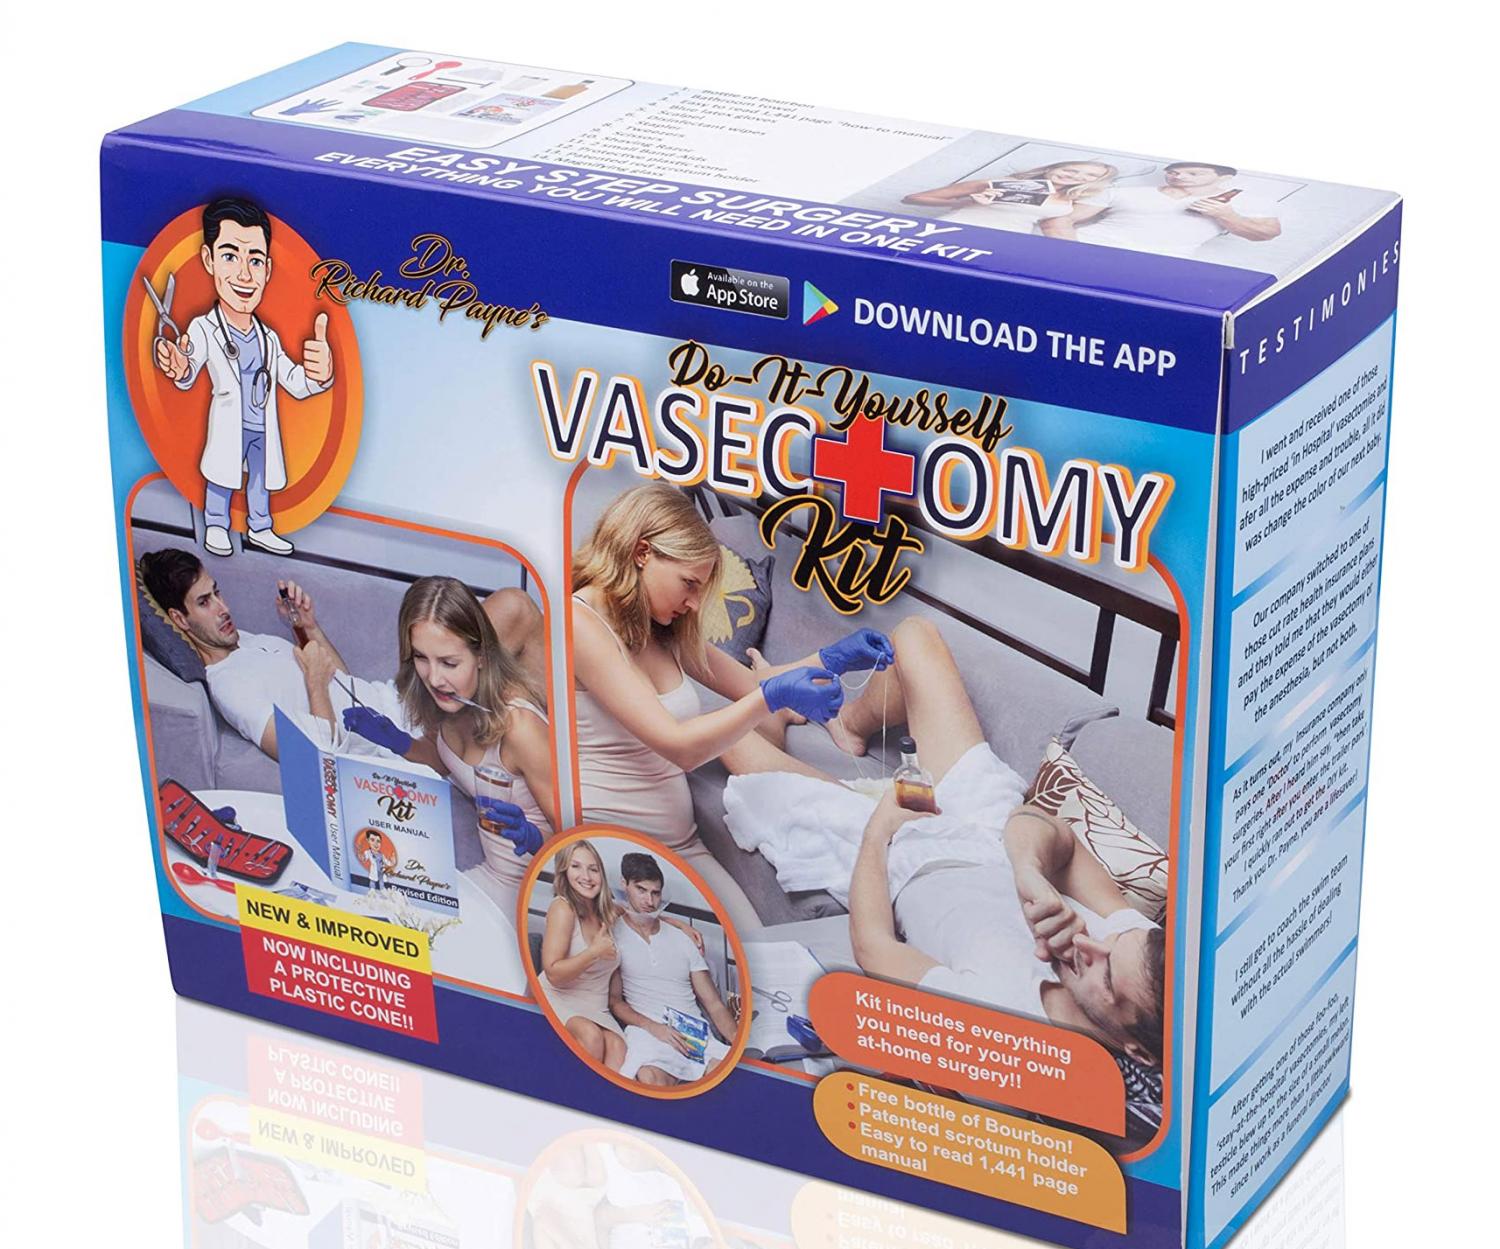 This DIY Vasectomy Kit Includes Everything You Need For an At-Home Surgery